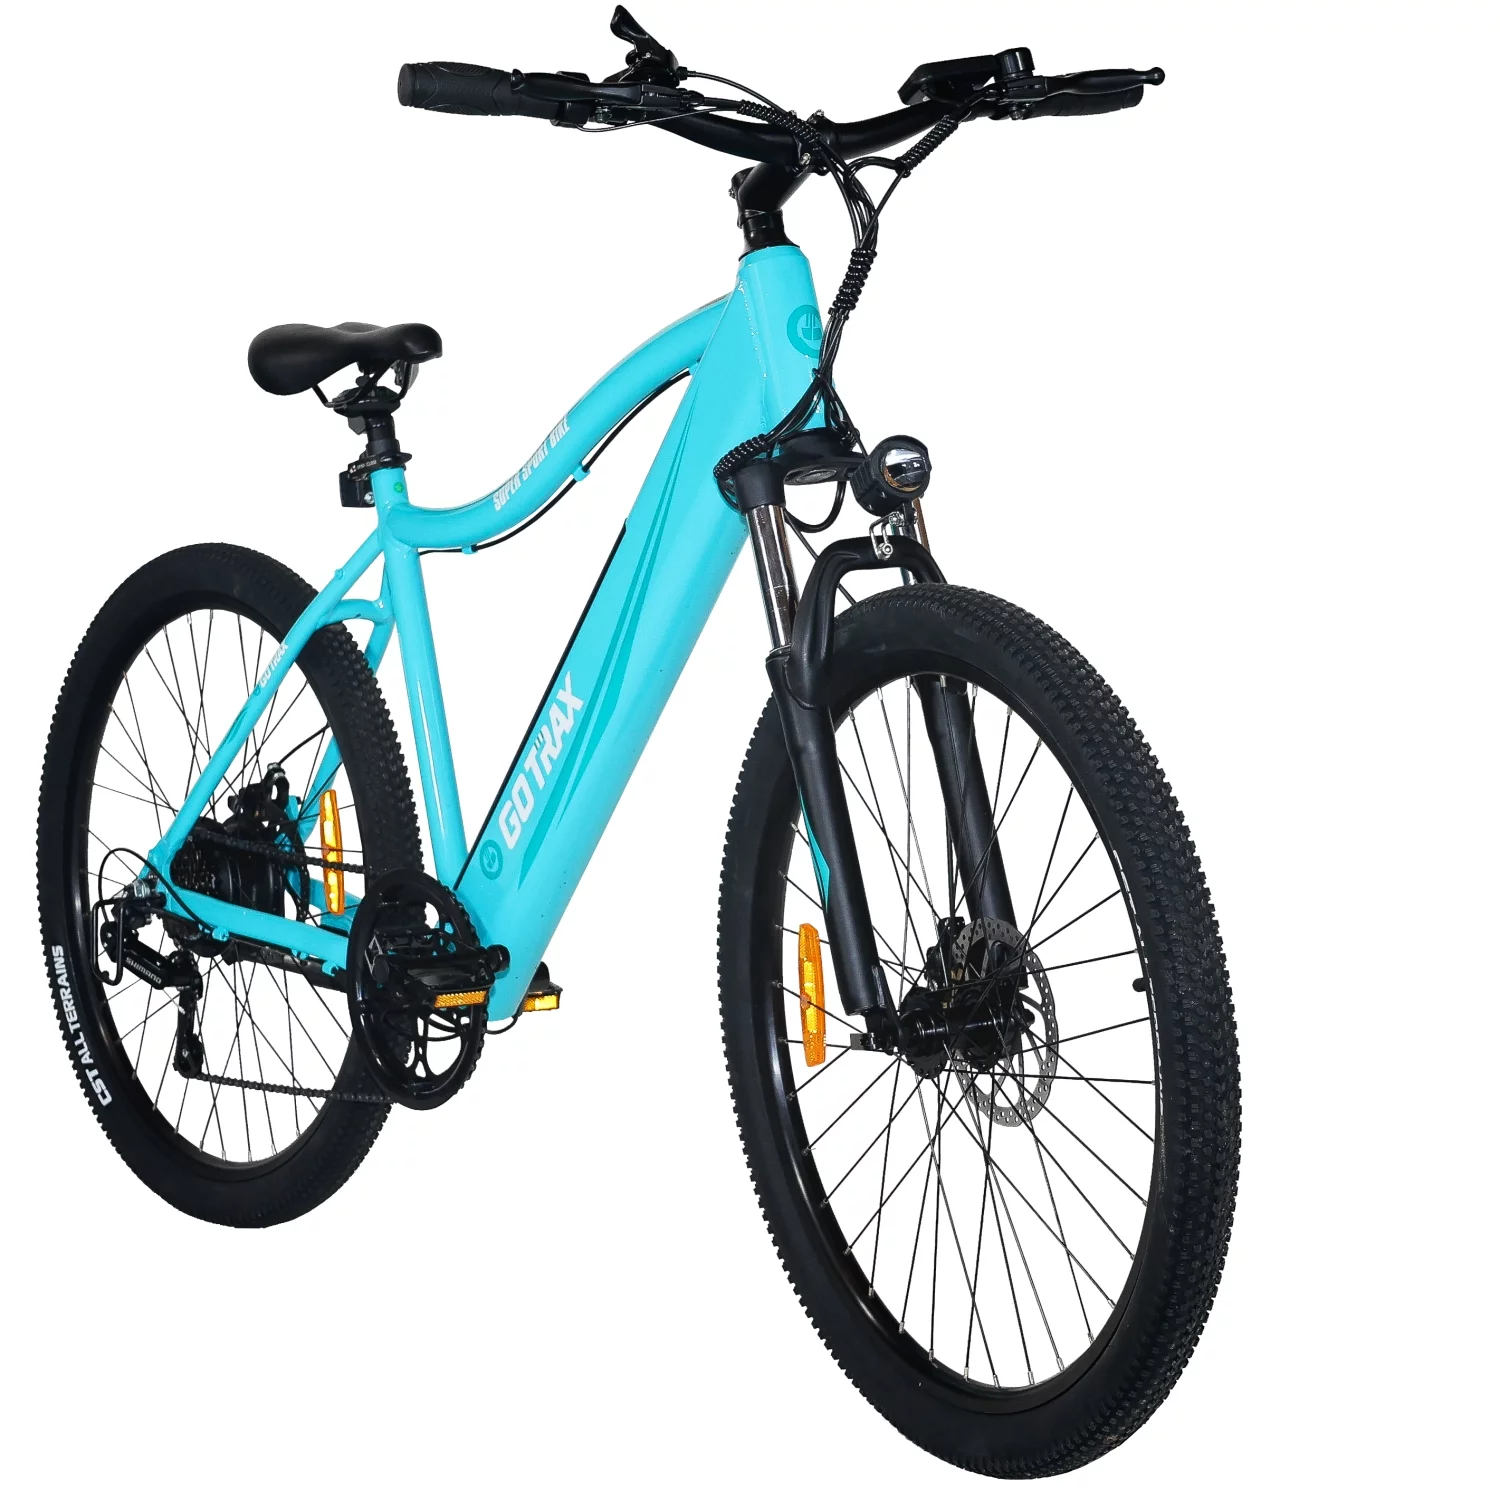 GOTRAX Emerge 26 In. Electric Bike with 36V 7.5Ah Removable Battery, 350W Powerful Motor up 20mph, Shimano Professional 7 Speed Gear and Dual Disc Brakes Alloy Frame Electric Bicycle